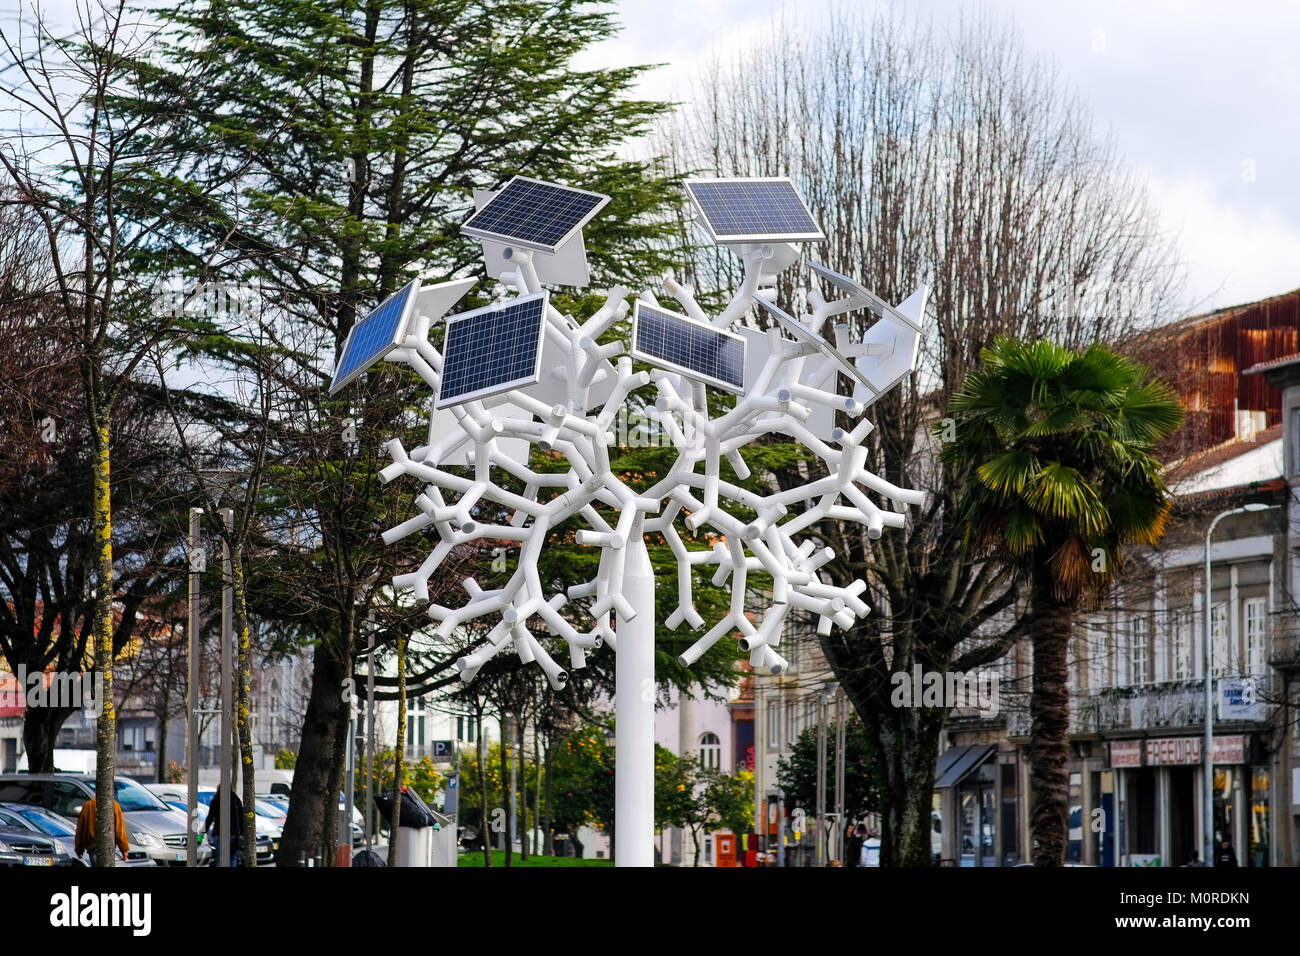 solar panels supply with energy  a tree shaped mobile charger and WiFi antenna in the main square of Braga, a city in the north of Portugal Stock Photo